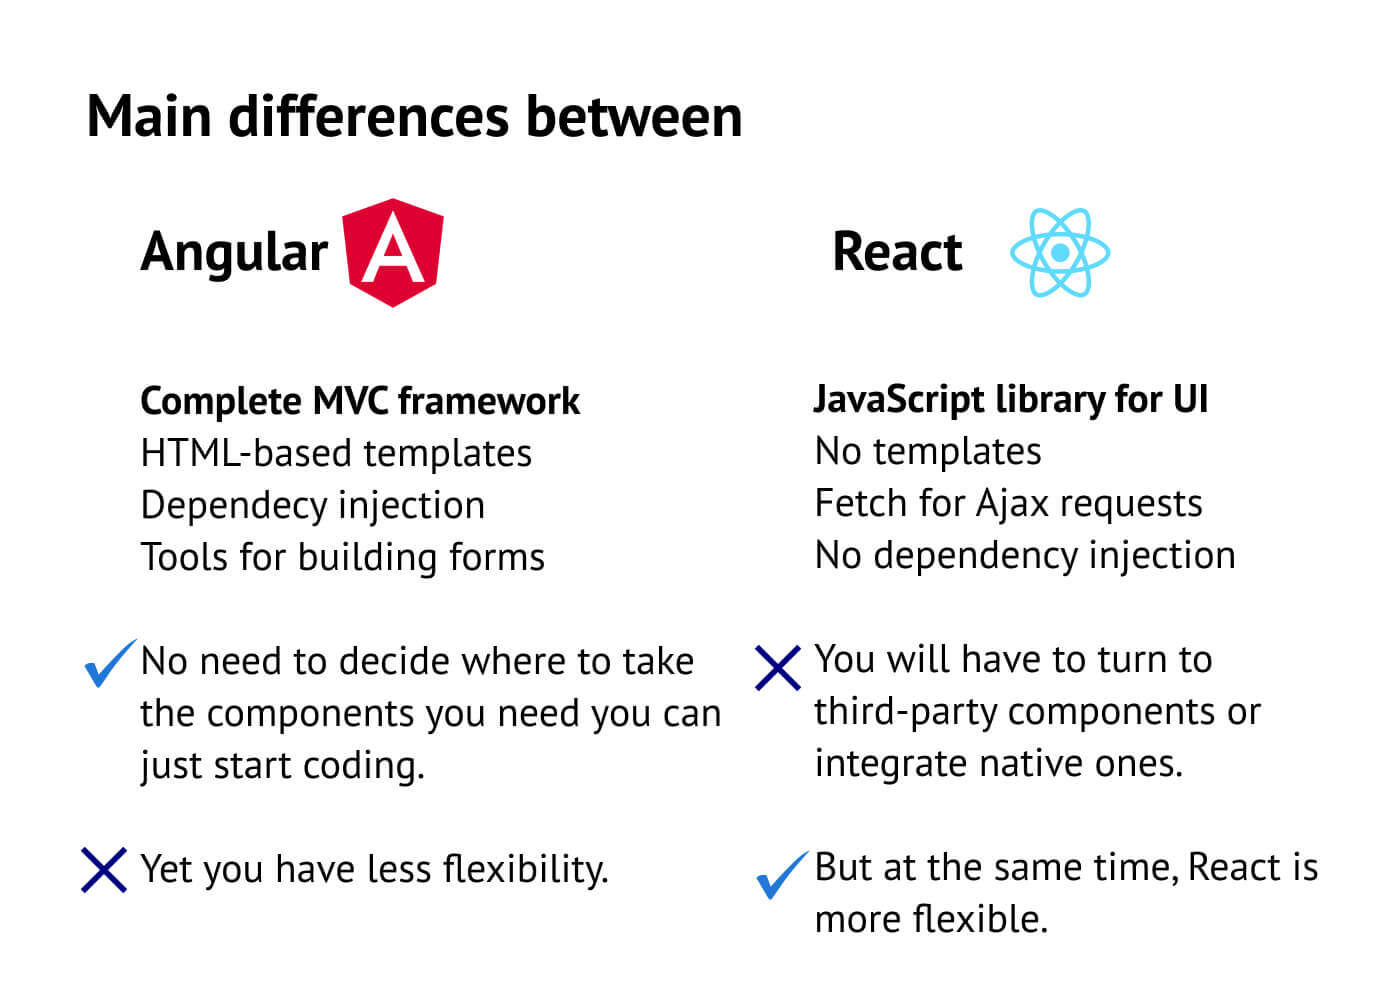 Differences between Angular and React